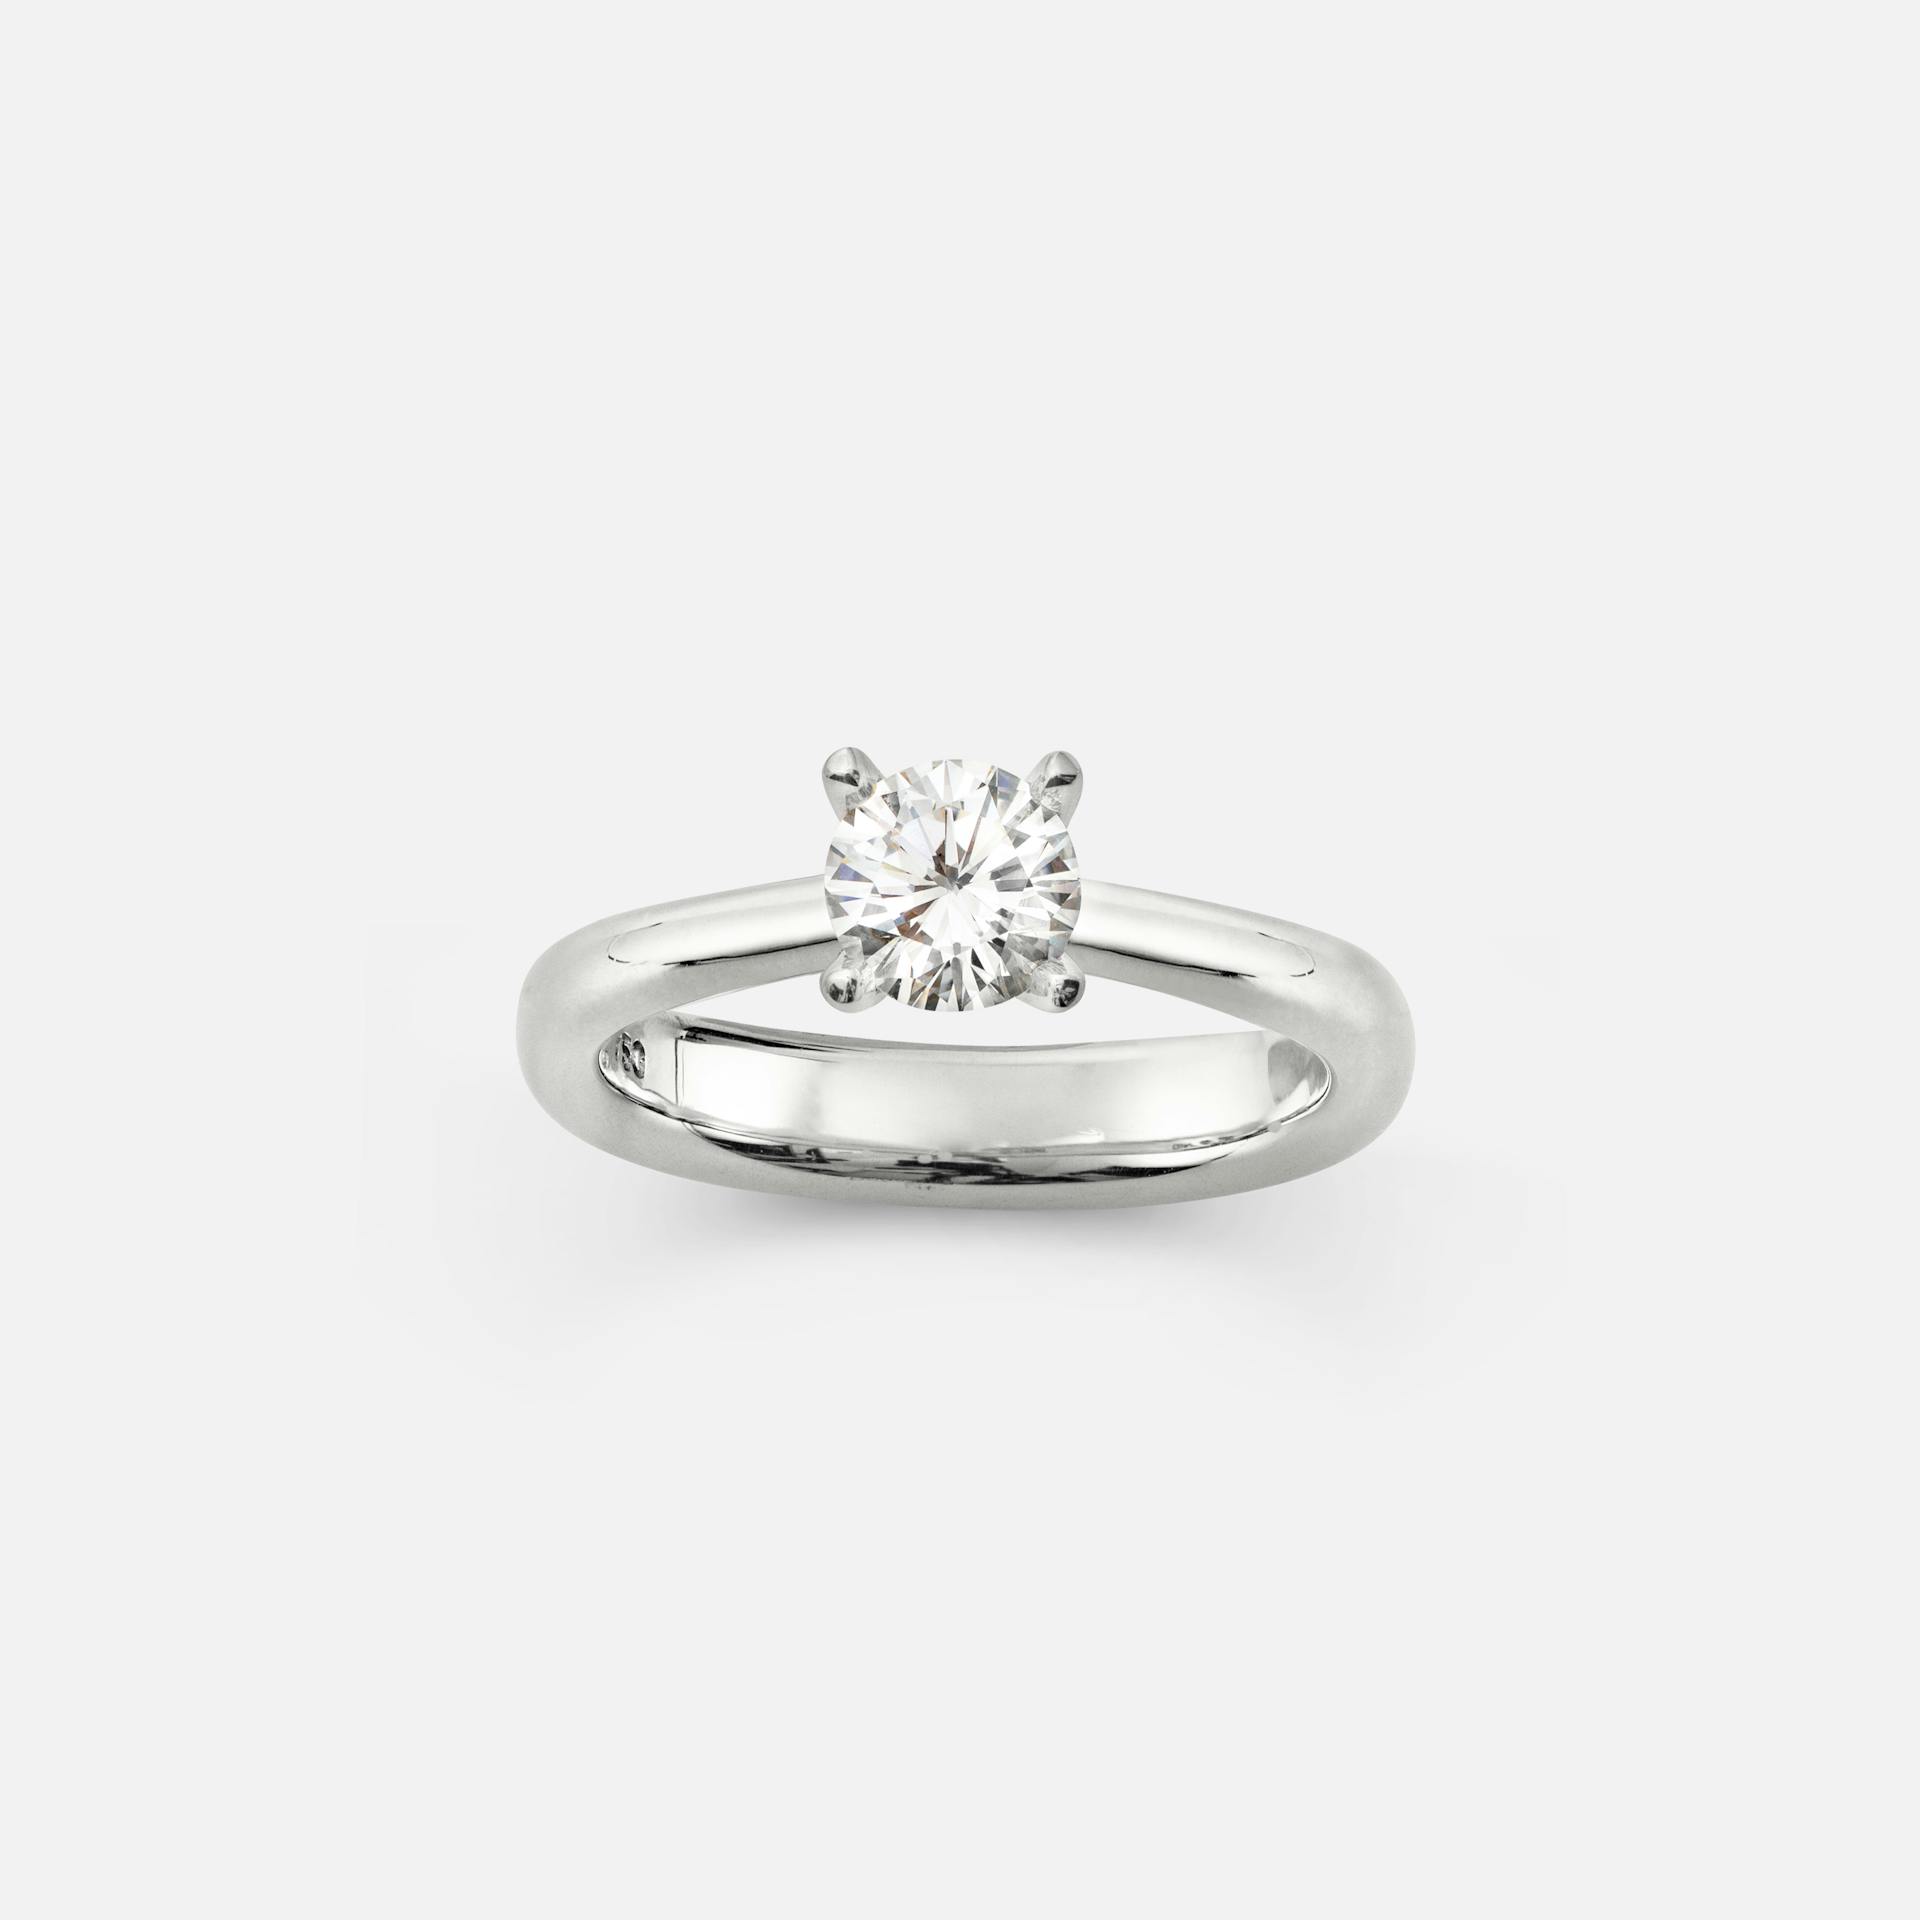 Winter Frost solitaire ring Dummy item for web - ring heavy solitaire PT Platin set with a brilliant-cut diamond from 1.00 ct. TW. VS.

